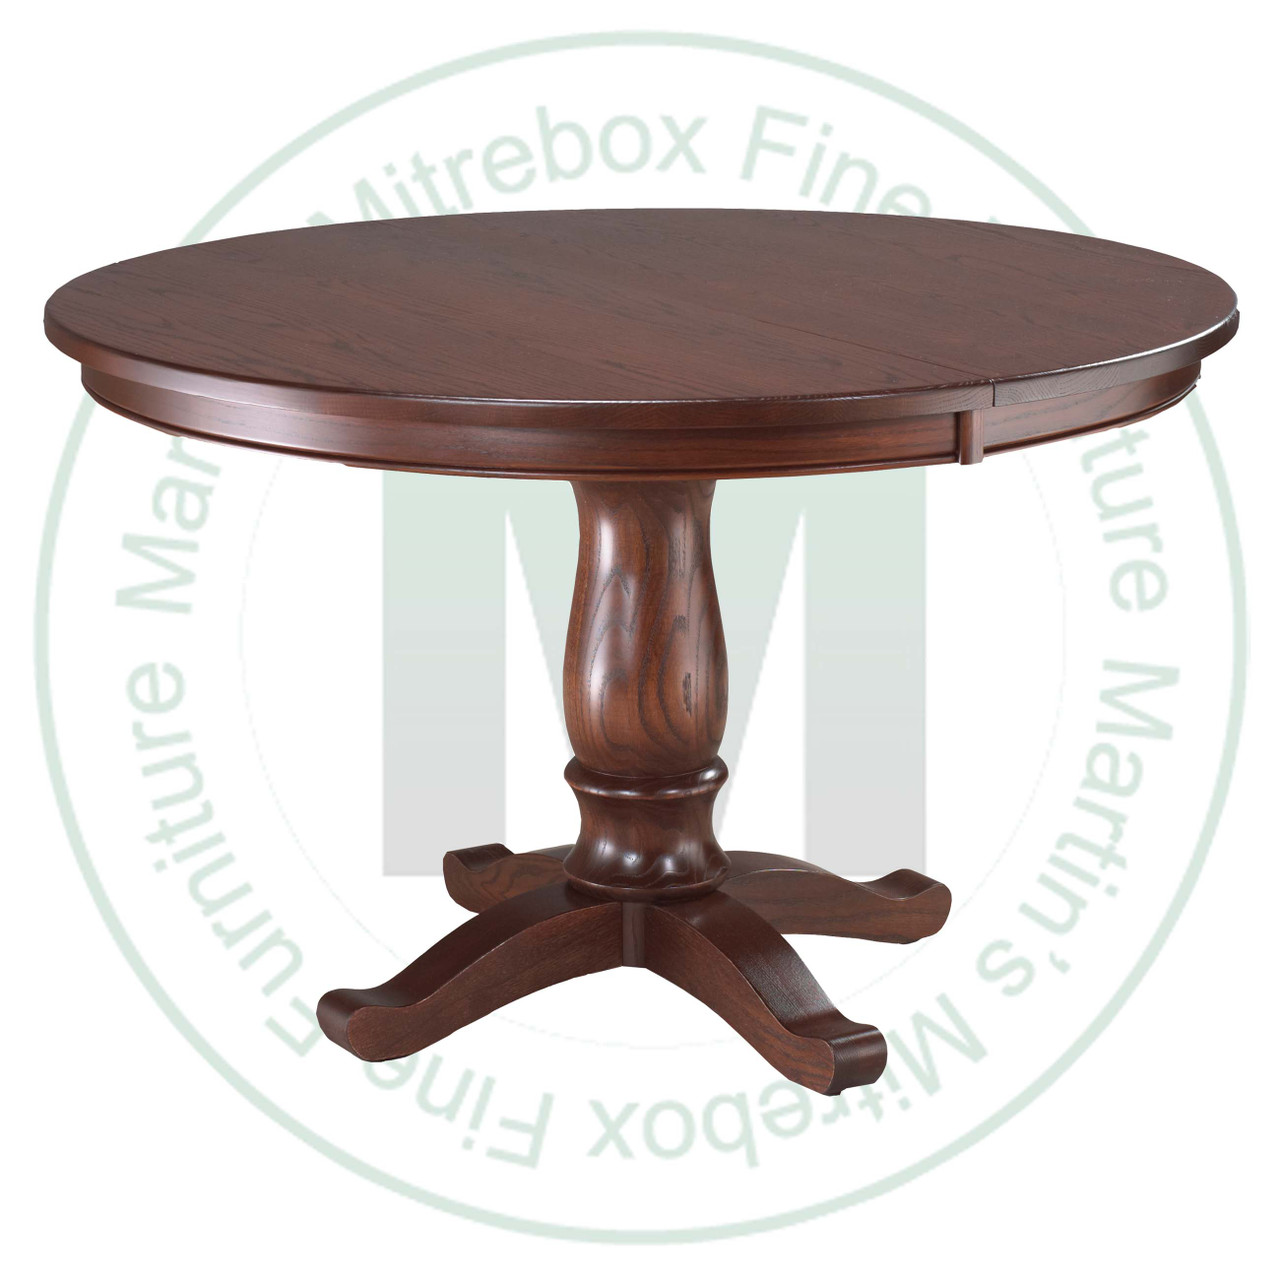 Wormy Maple Kimberly Crest Single Pedestal Table 36''D x 48''W x 30''H Round Solid Table